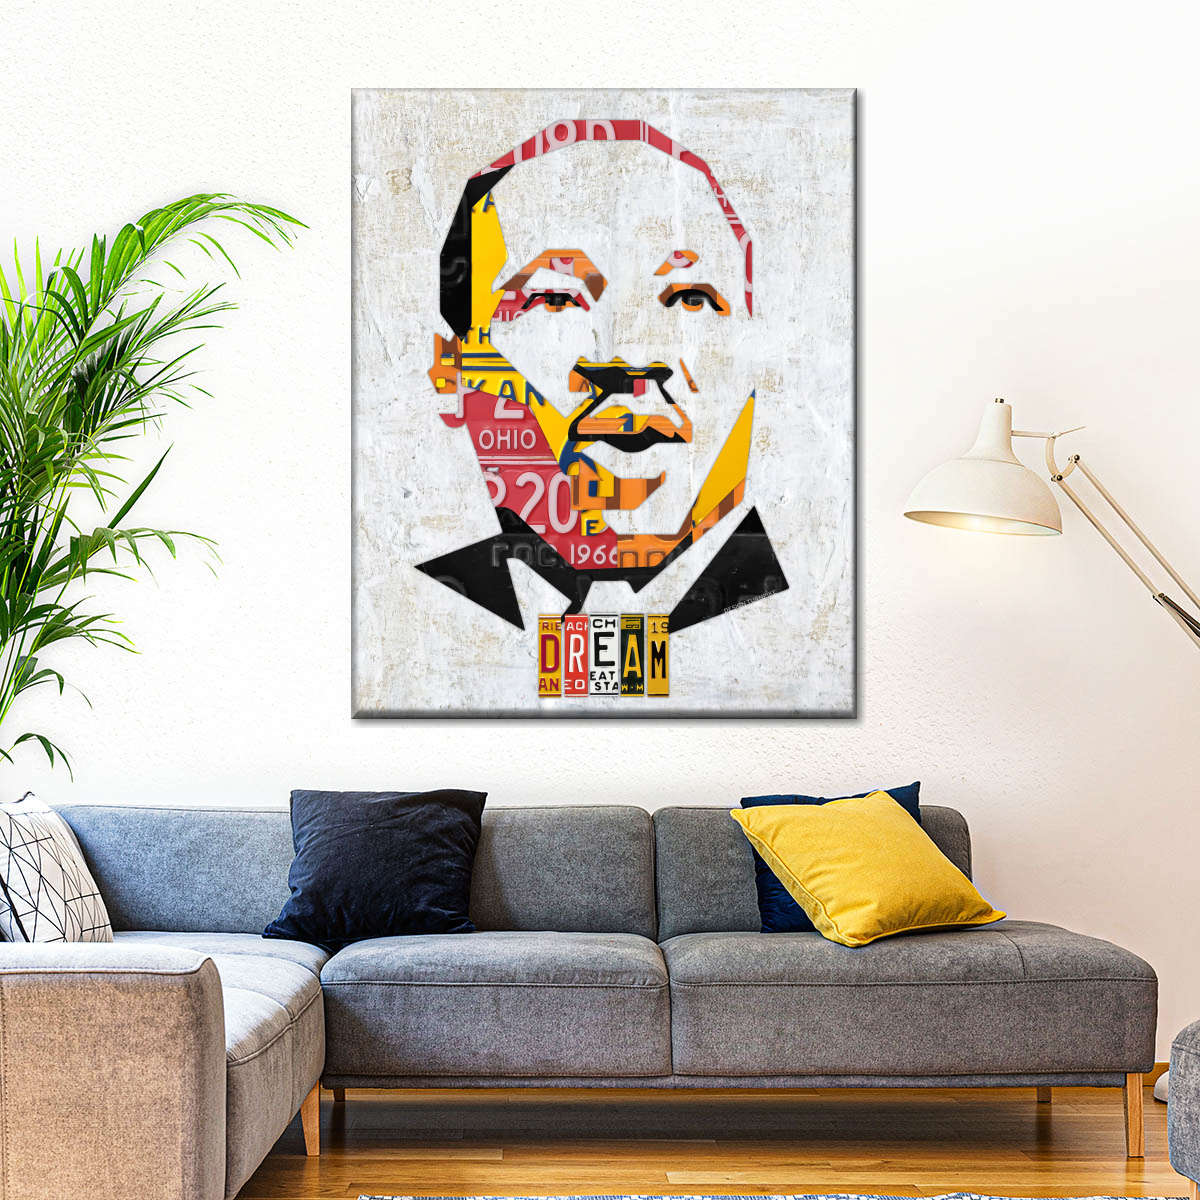 martin luther king jr abstract art